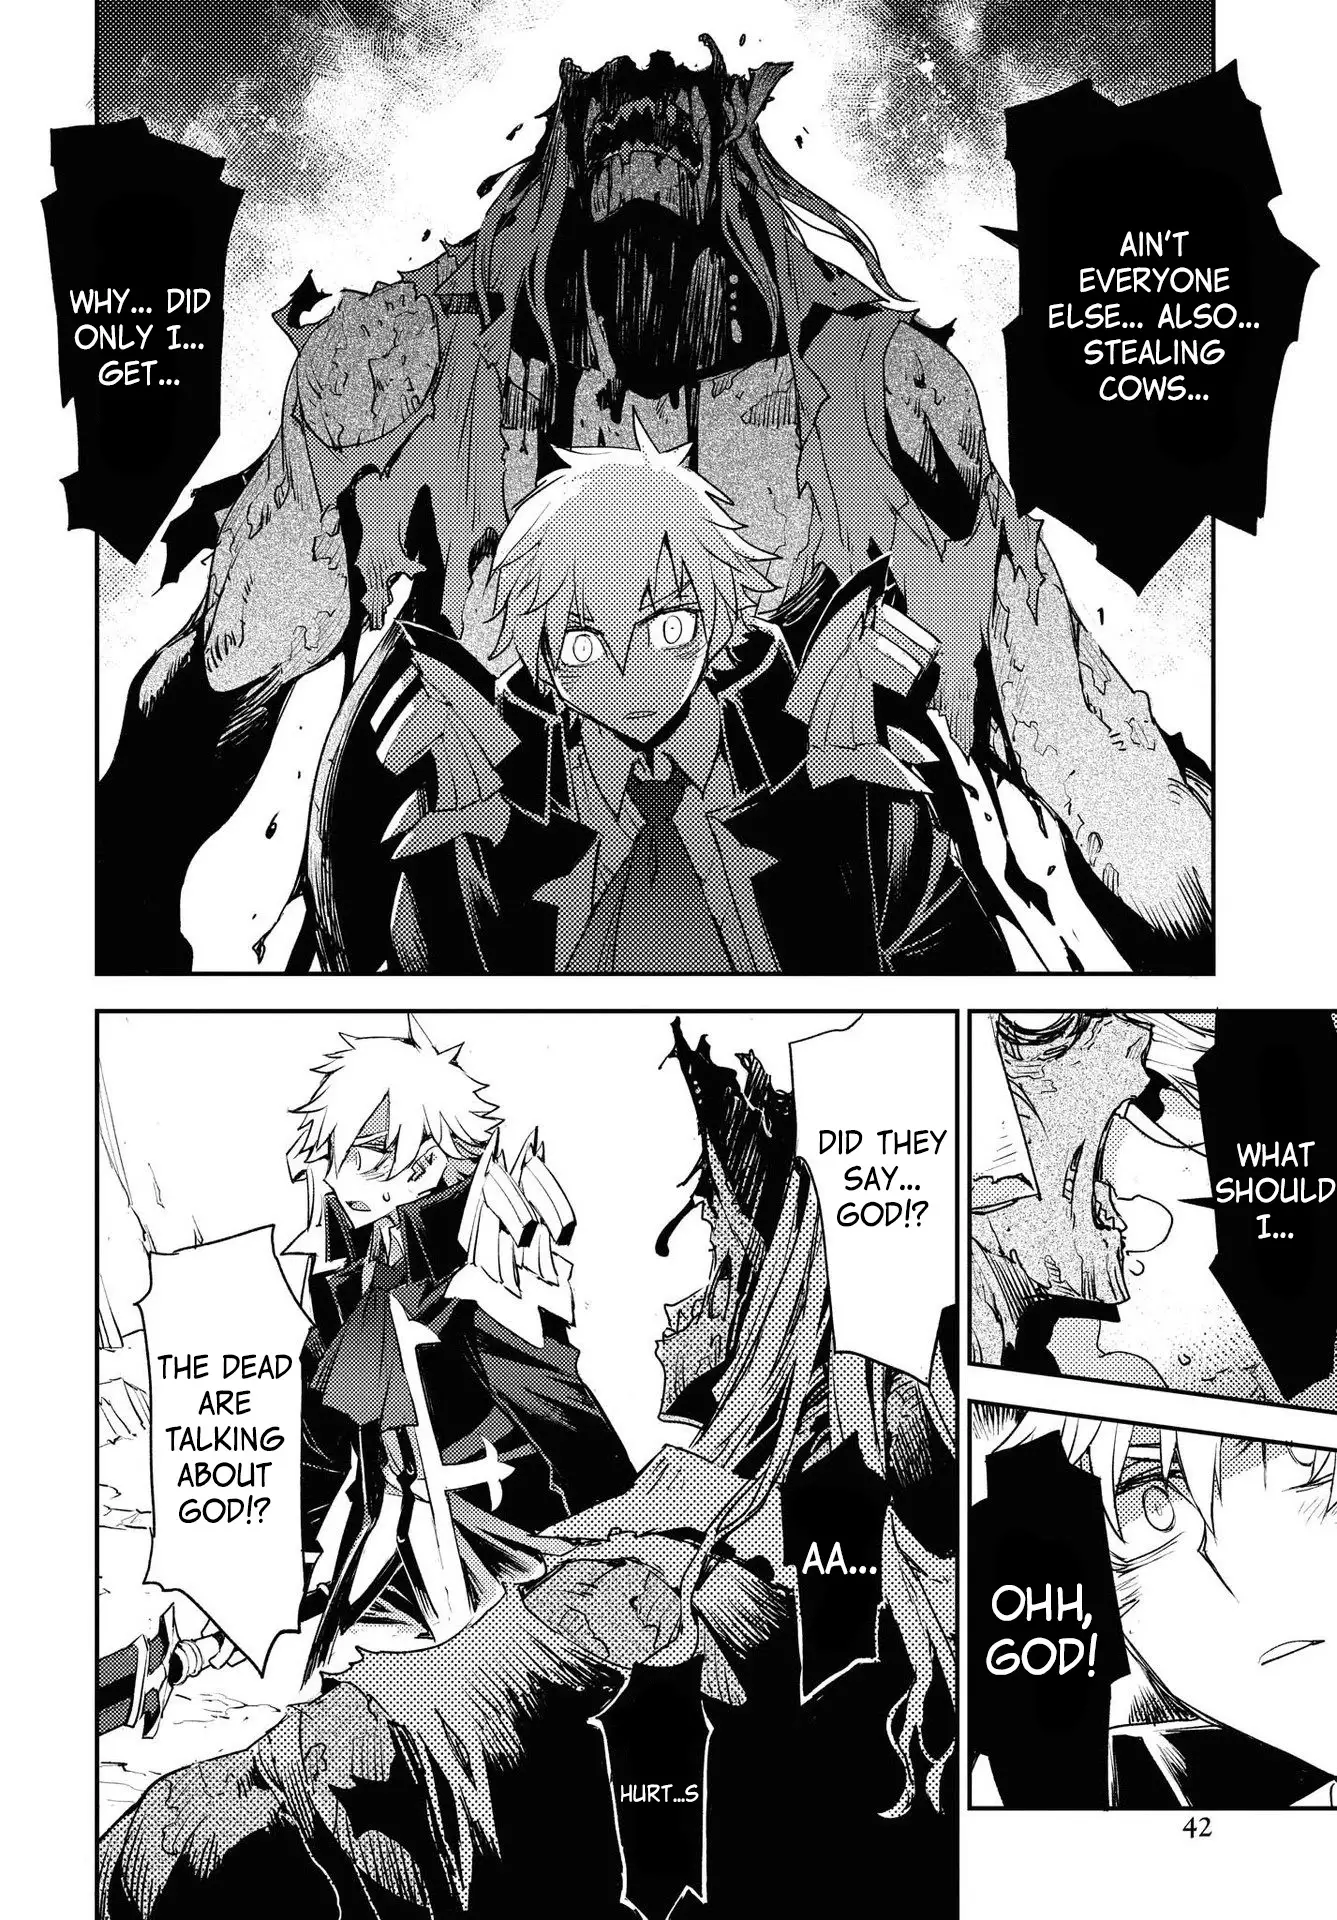 Fate/grand Order: Epic Of Remnant - Subspecies Singularity Iv: Taboo Advent Salem: Salem Of Heresy - 16 page 23